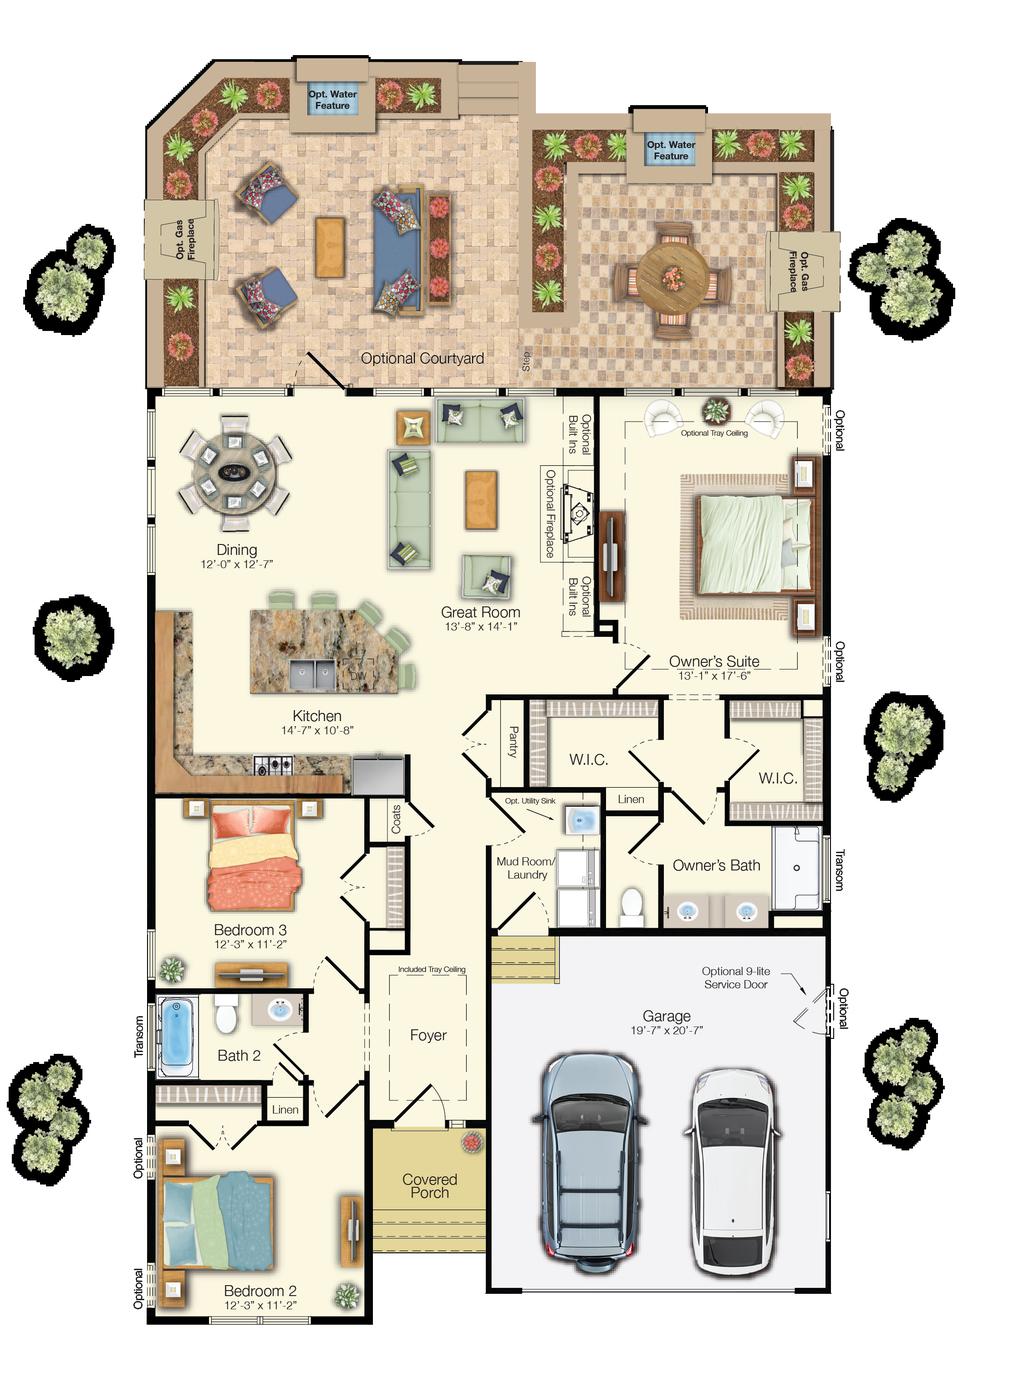 3-5 2-4 1,661-4,104 2,112-5,662 *Floor plan dimensions are